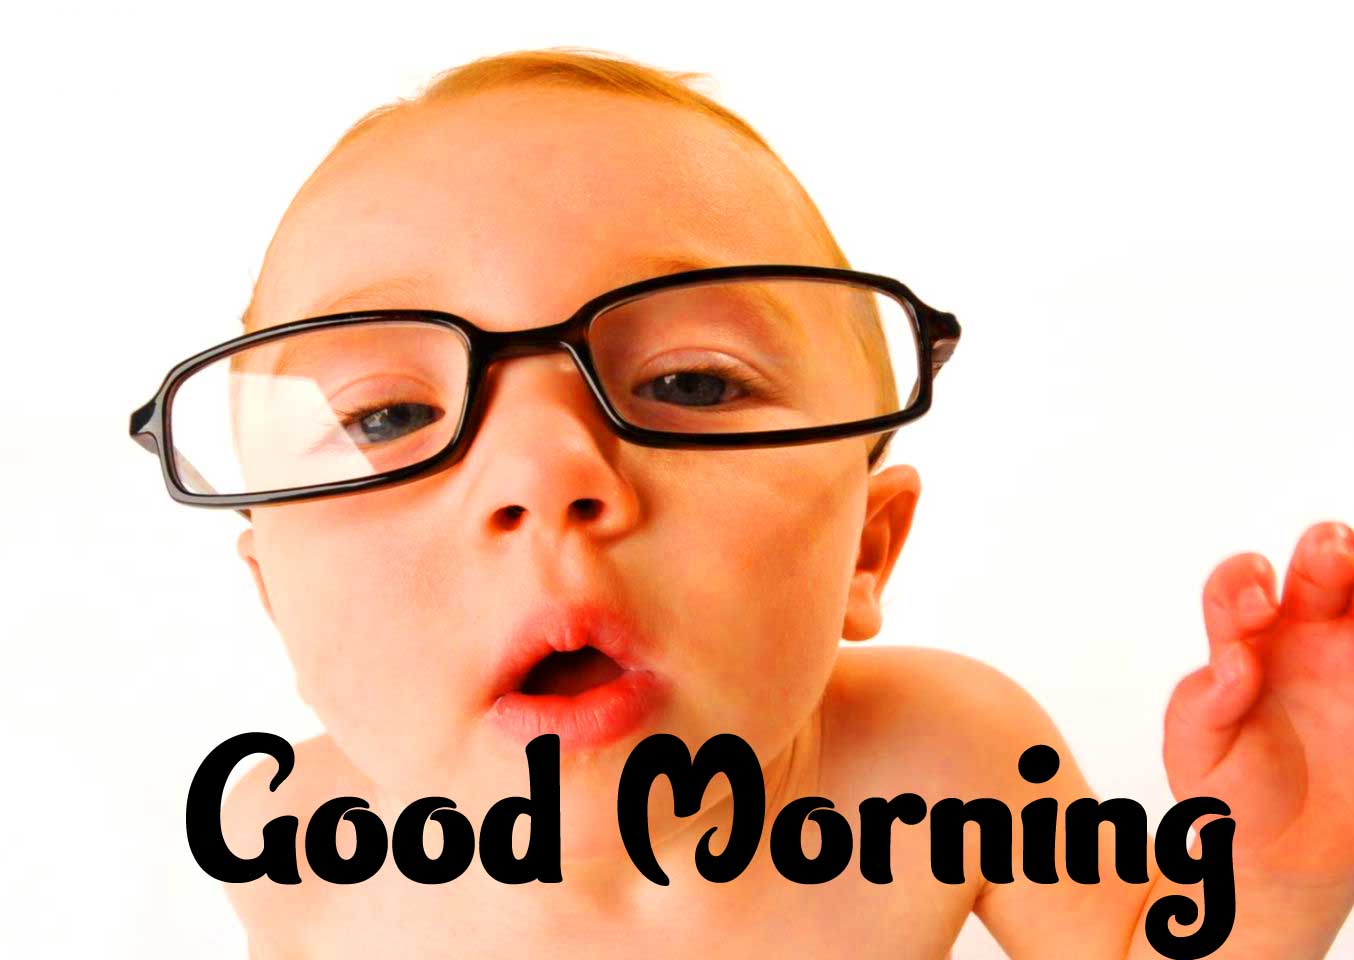 Cute Baby Boys & Girls Good Morning Images Pics Wallpaper free Download 